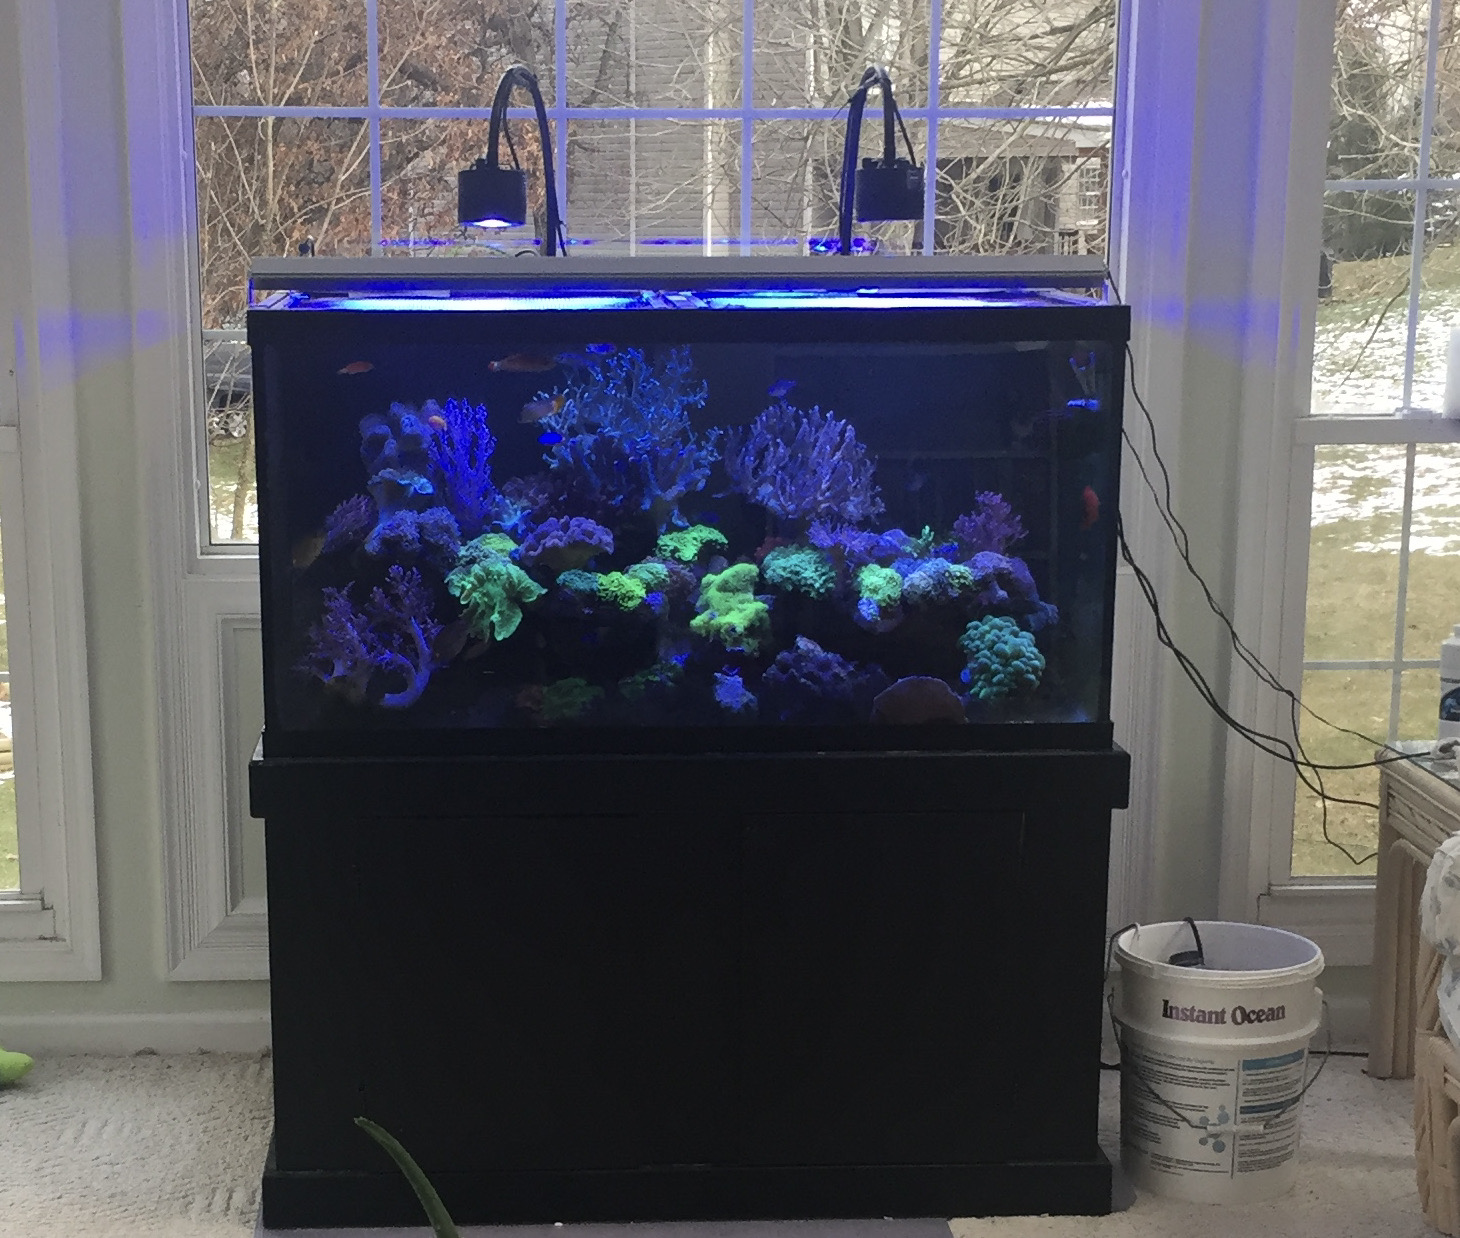 Automatic Top-Off Systems, Reservoirs, and Dehumidifiers, Reef Builders